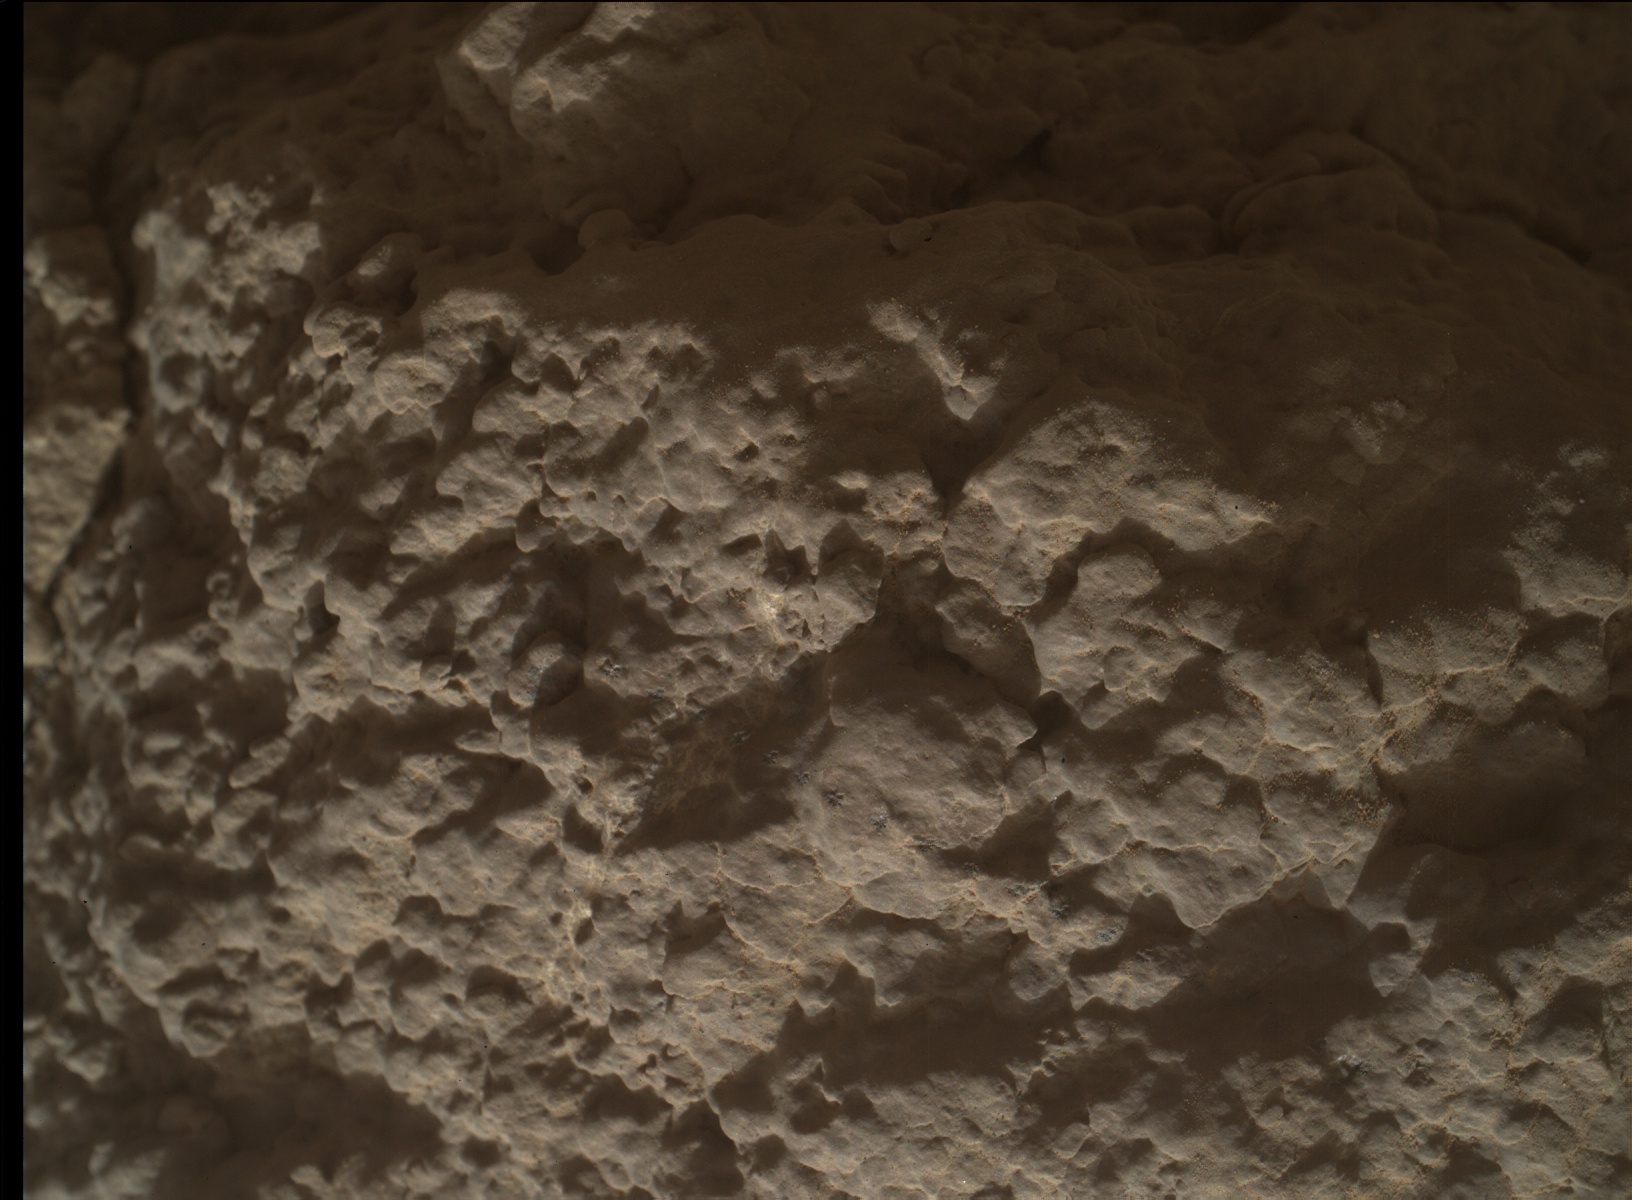 Nasa's Mars rover Curiosity acquired this image using its Mars Hand Lens Imager (MAHLI) on Sol 2587